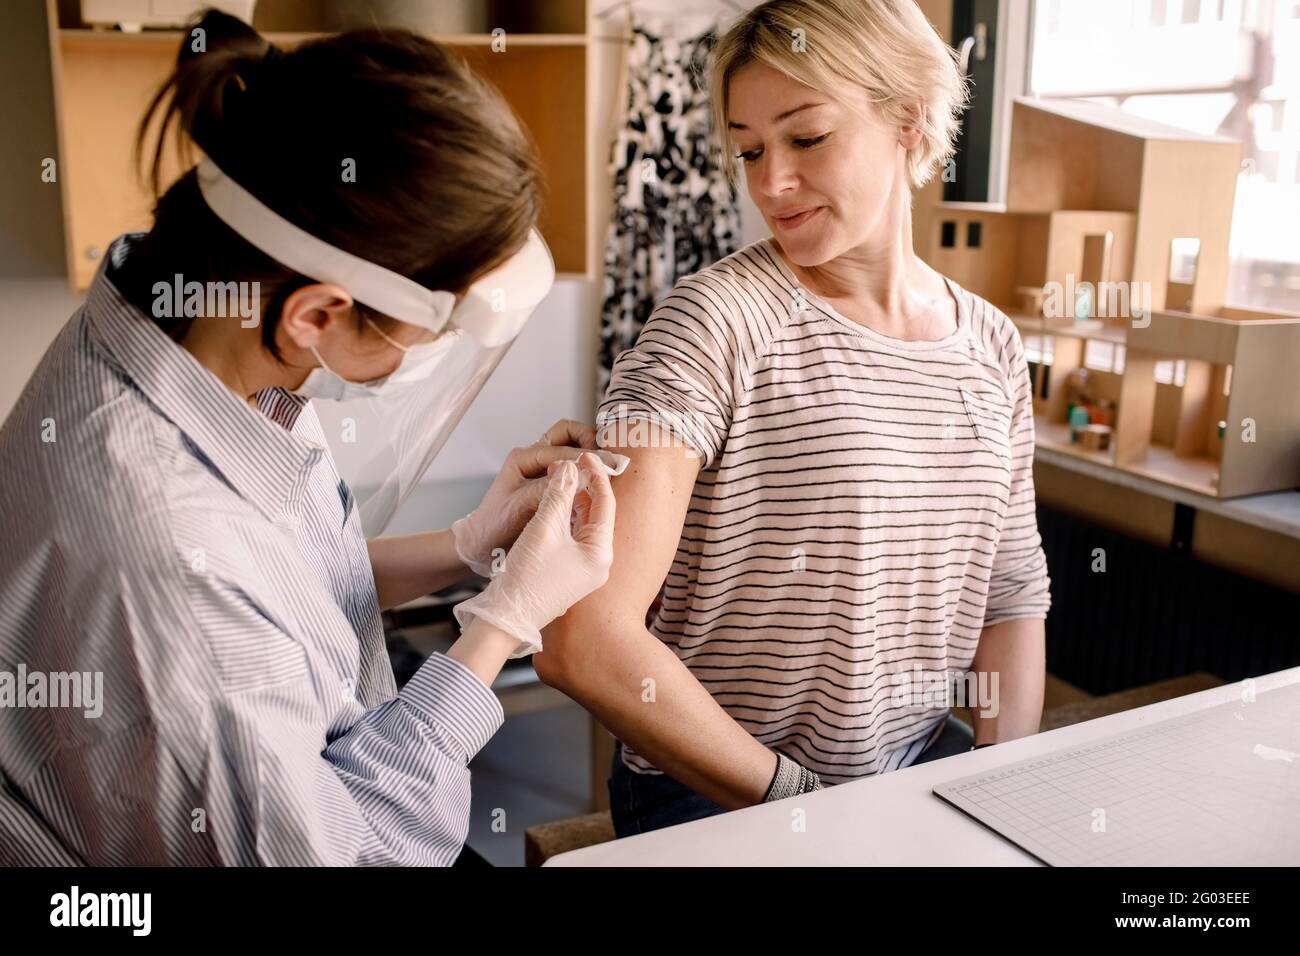 Female nurse injecting medicine to blond woman at home Stock Photo